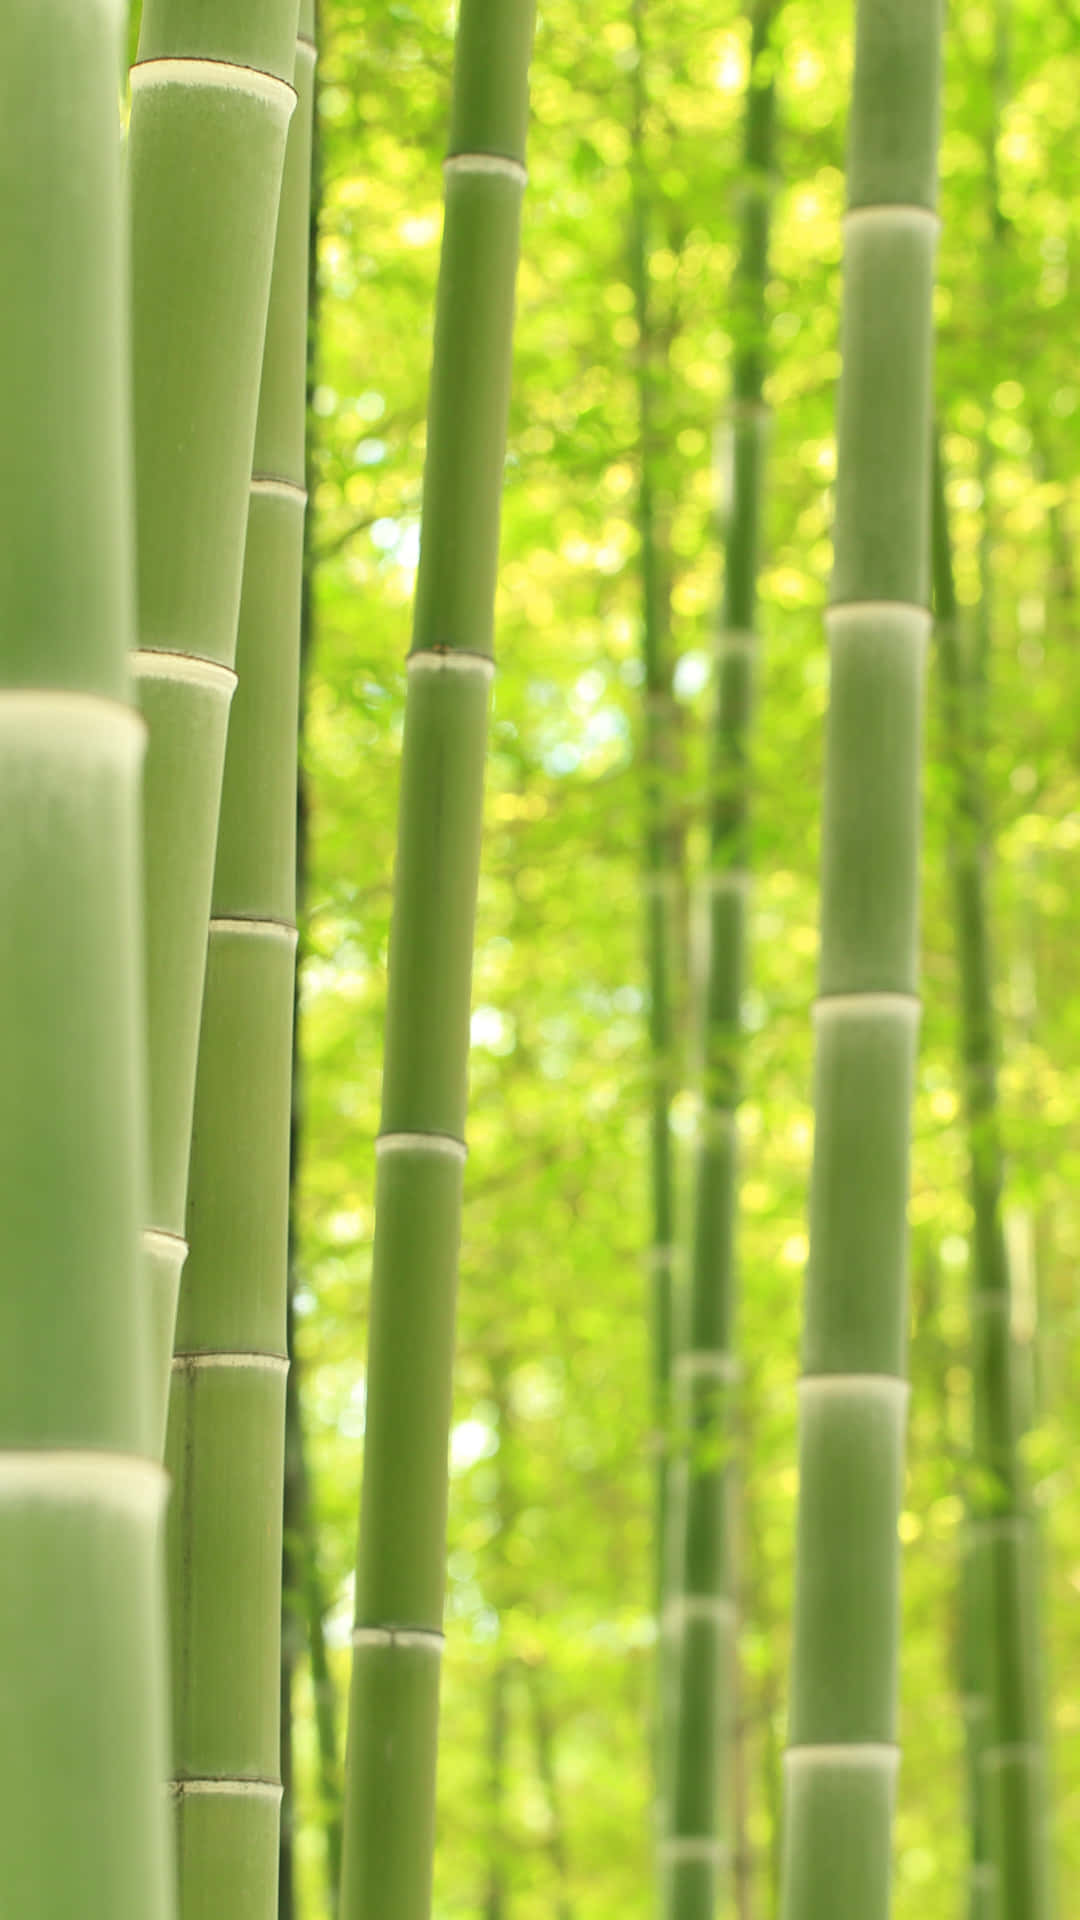 Bamboo Forest In A Green Forest Wallpaper